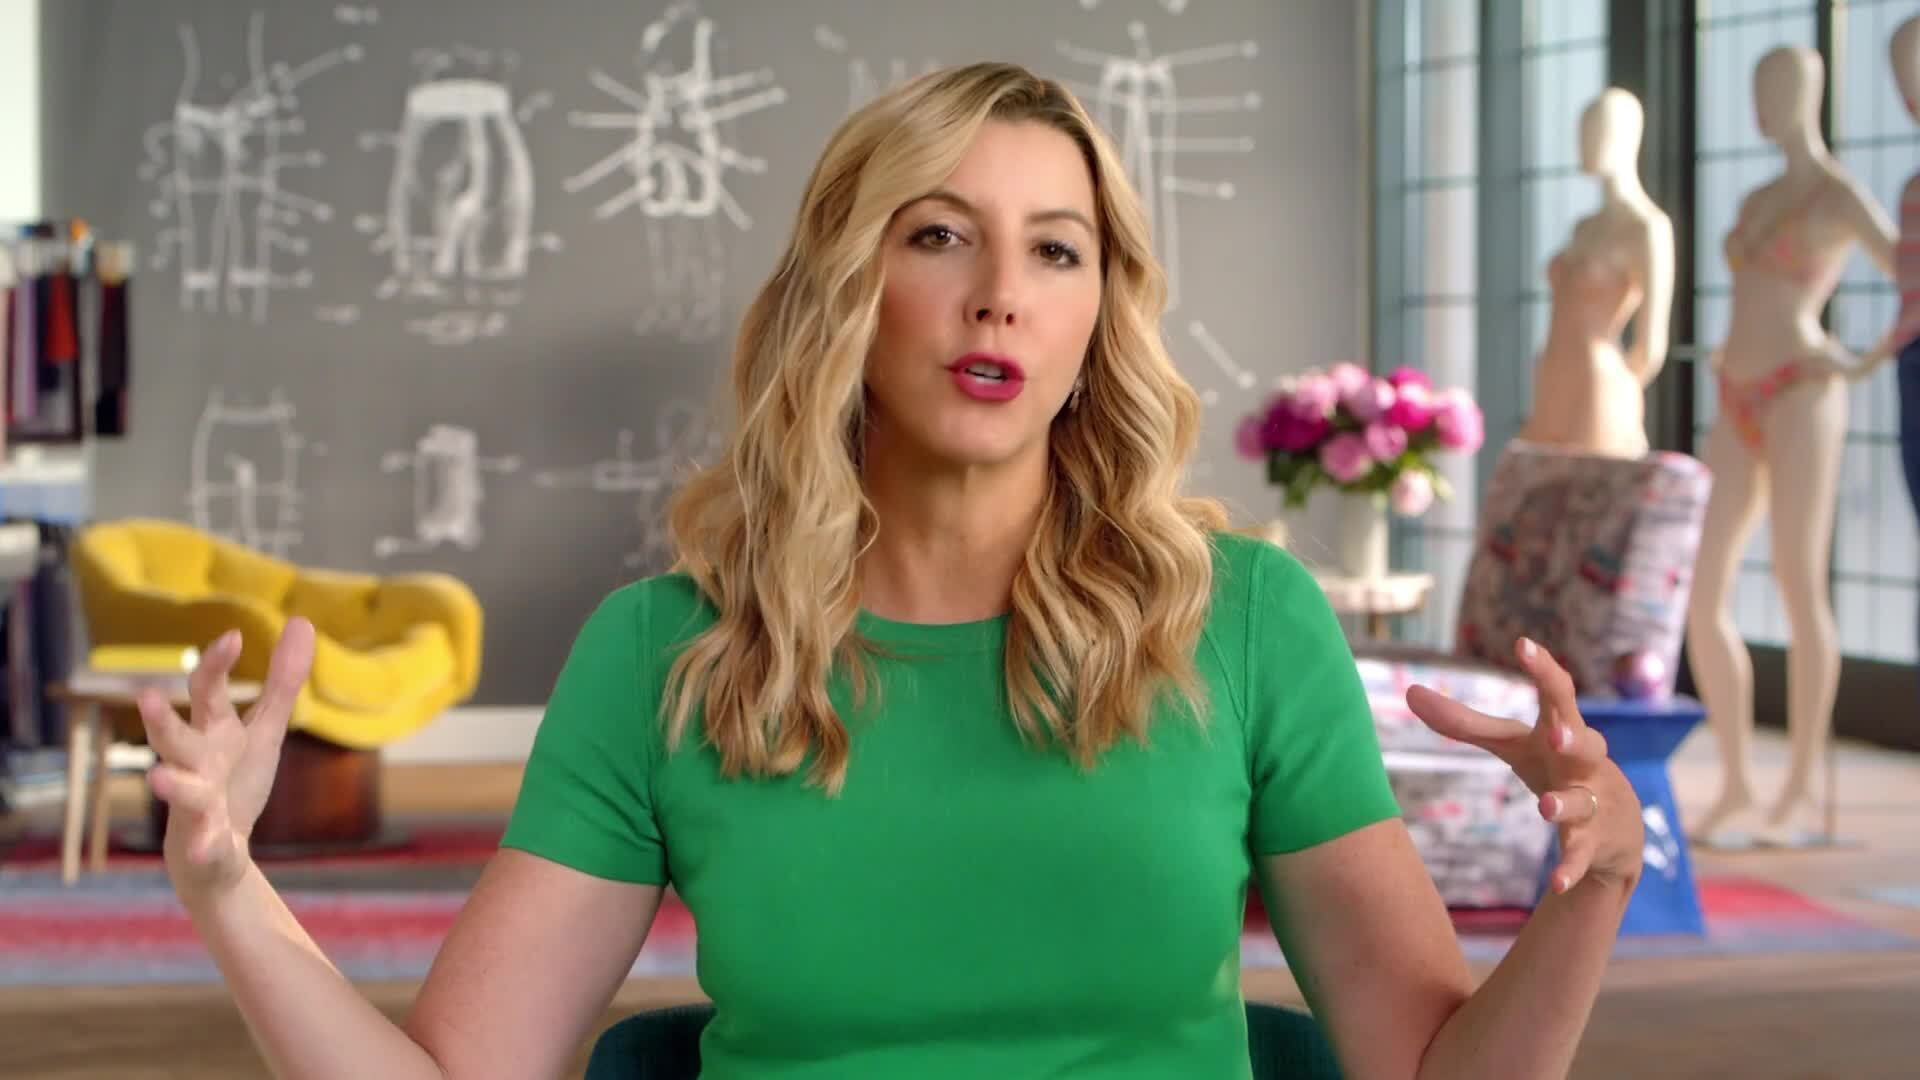 Sara Blakely's Top 10 Rules For Success 